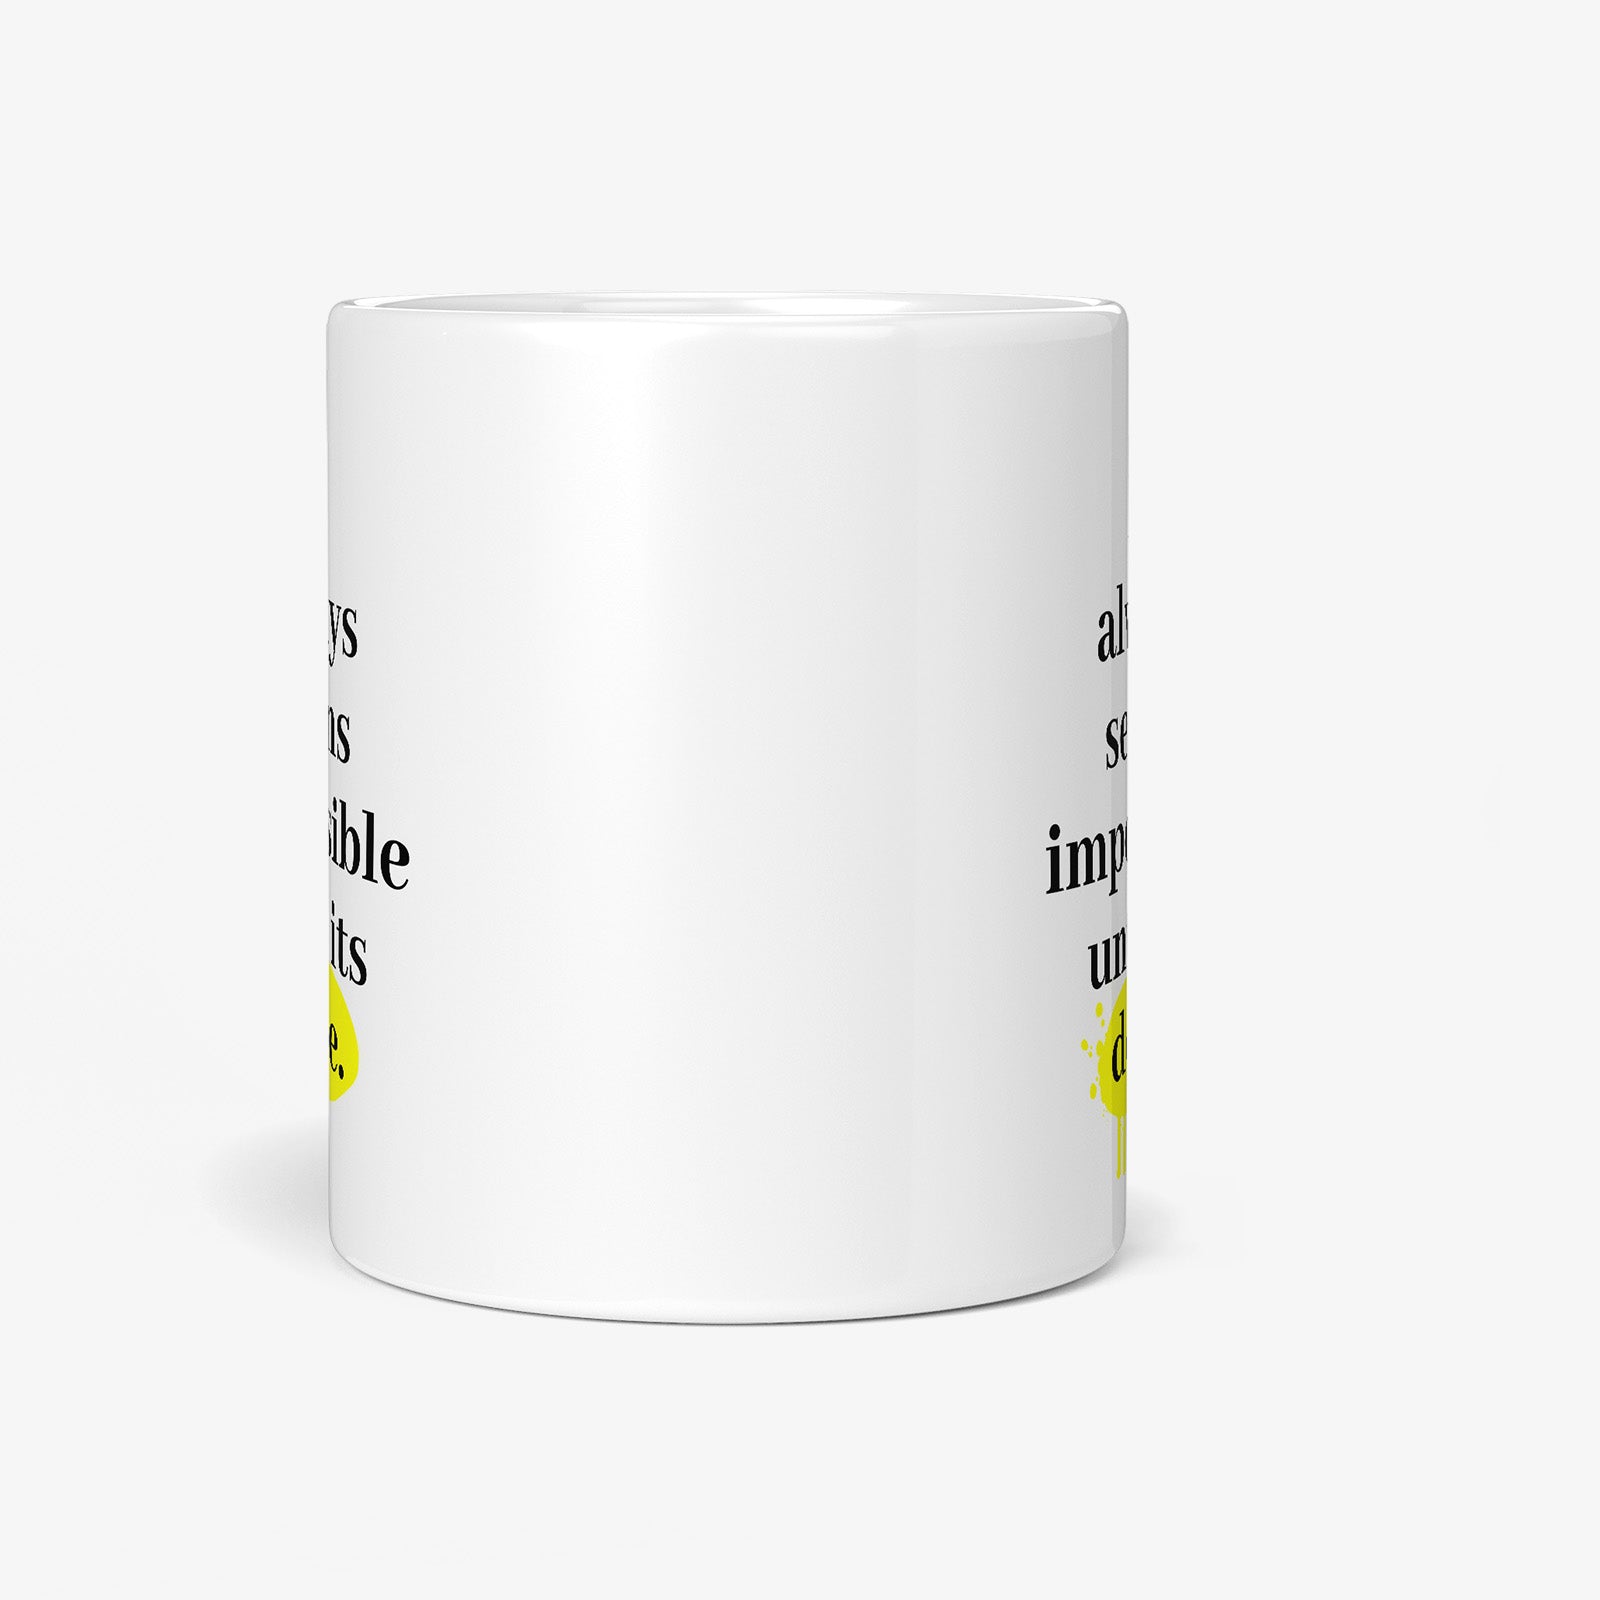 Be inspired by Nelson Mandela's famous quote, "It always seems impossible until it's done" on this white and glossy 11oz coffee mug with a front view.